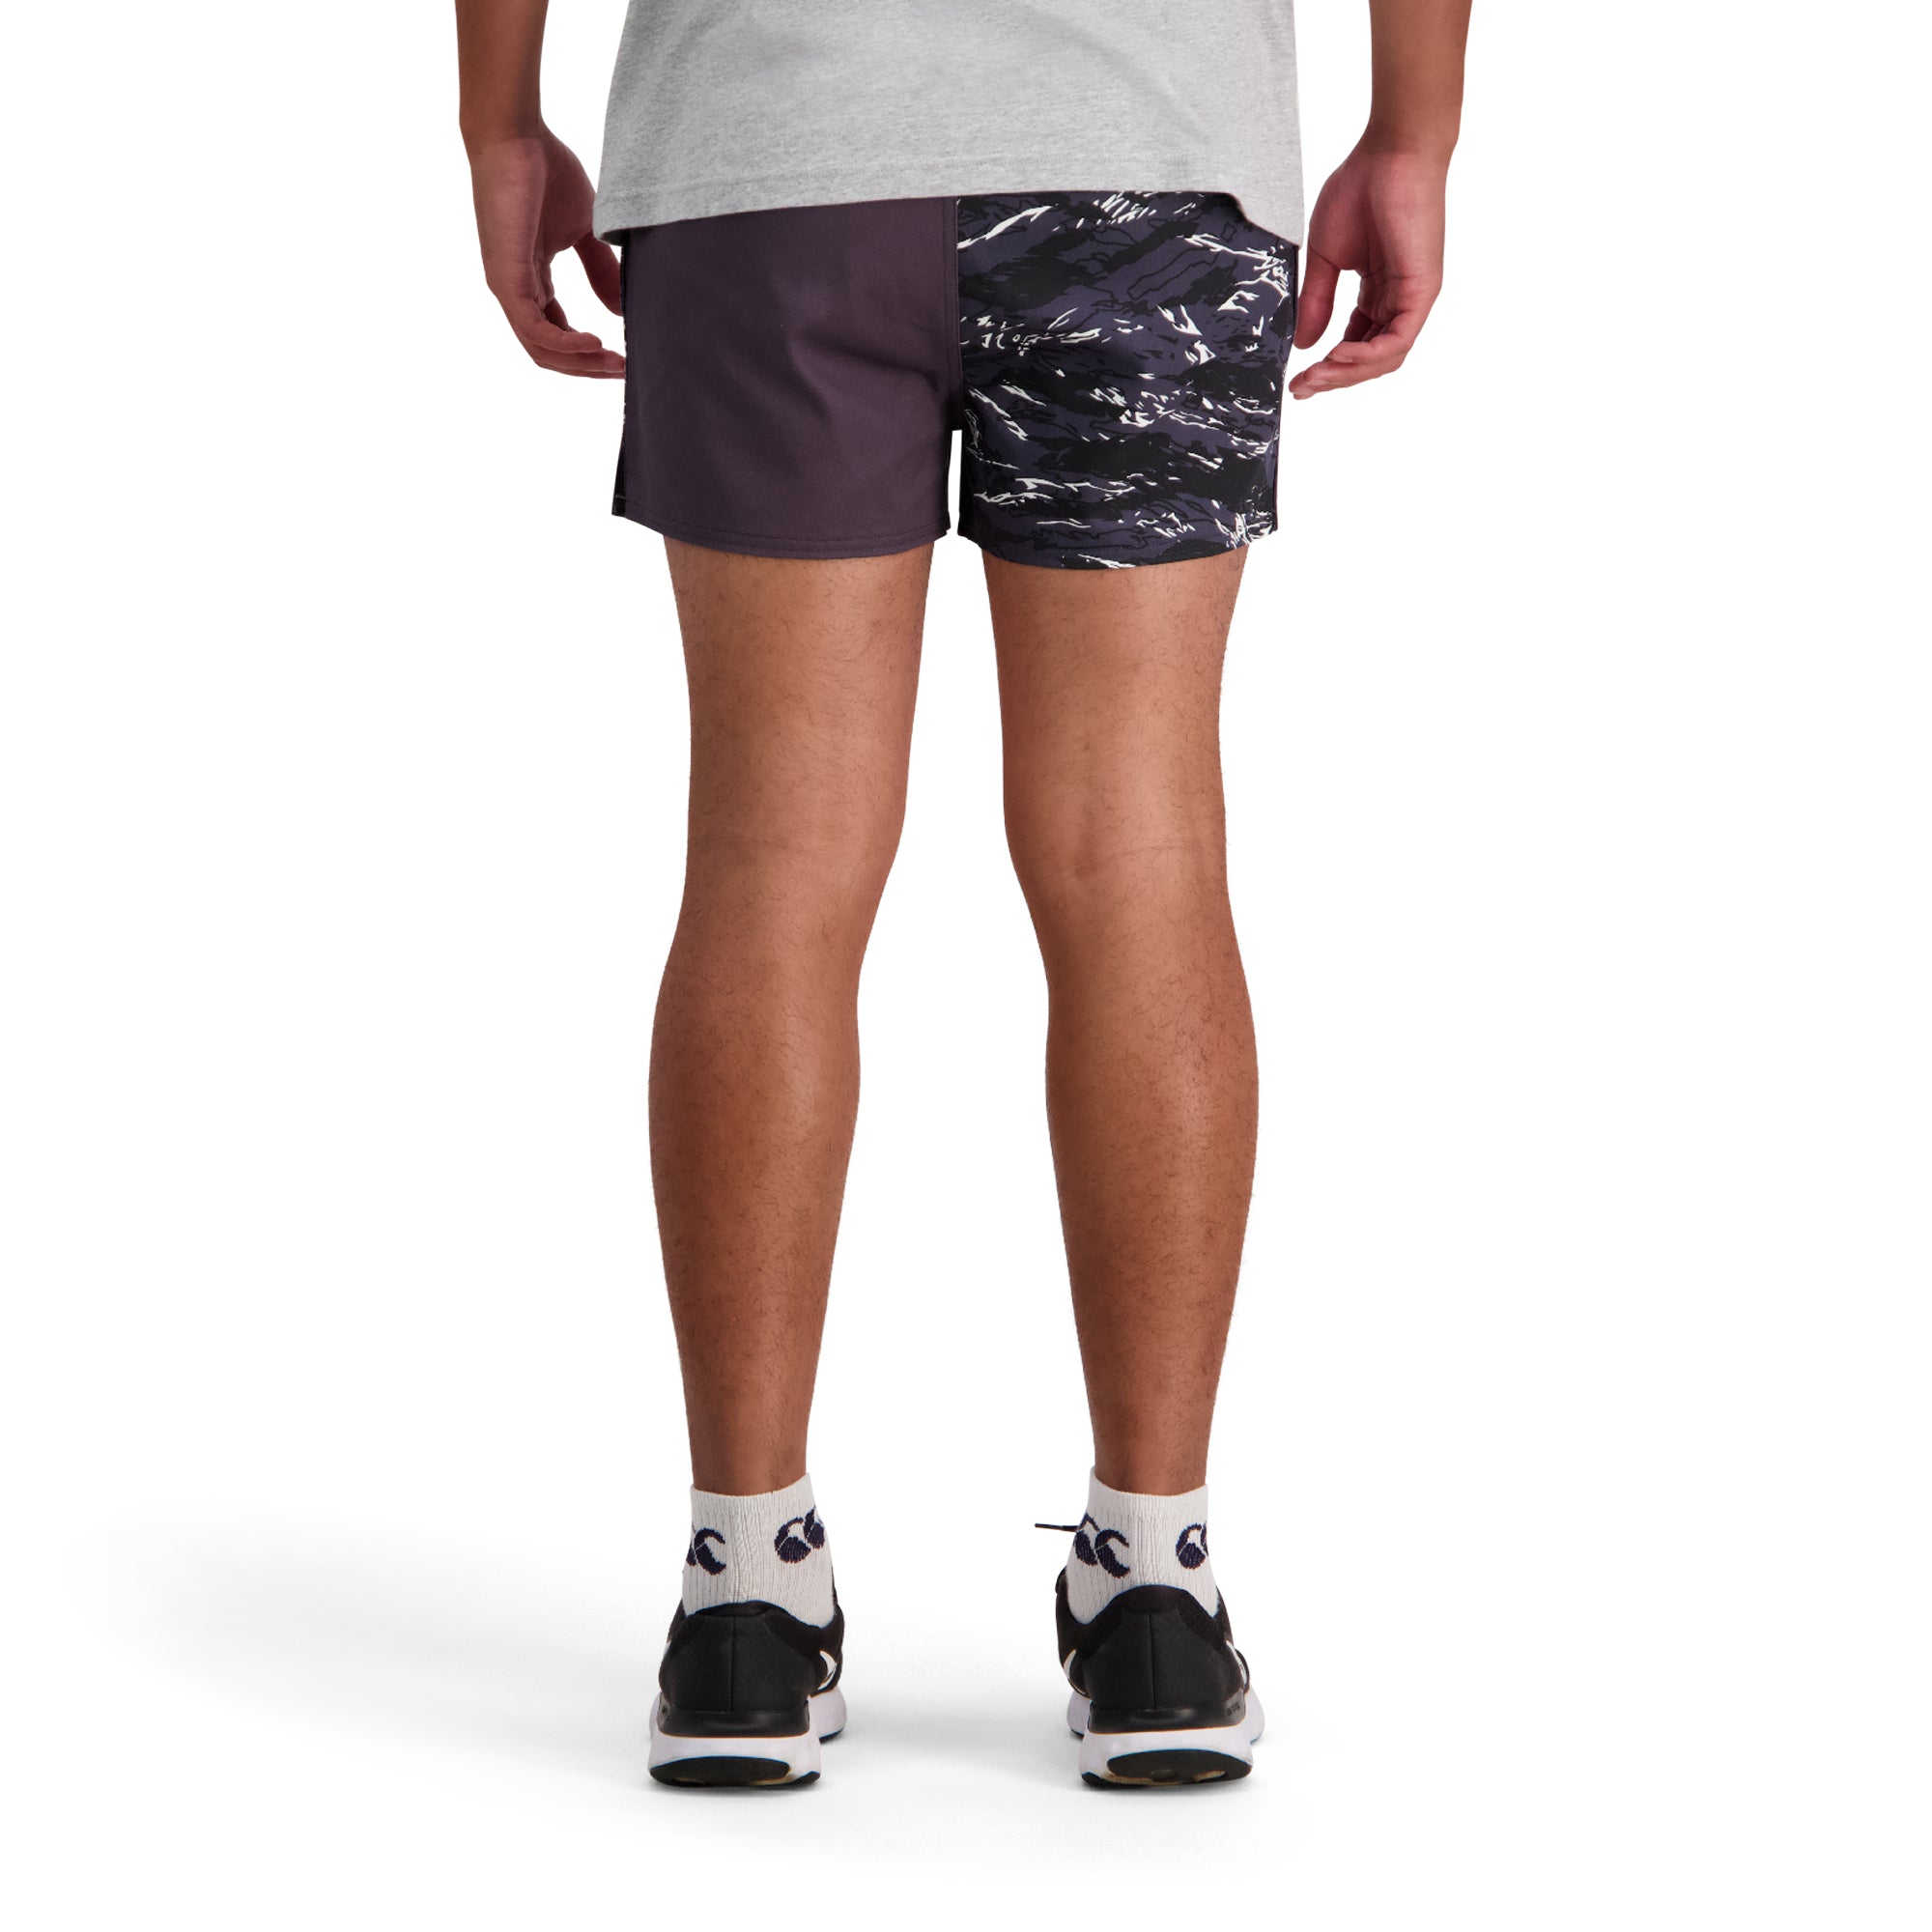 Canterbury Harlequin Shorts | Canterbury Rugby Clothing for Farmers